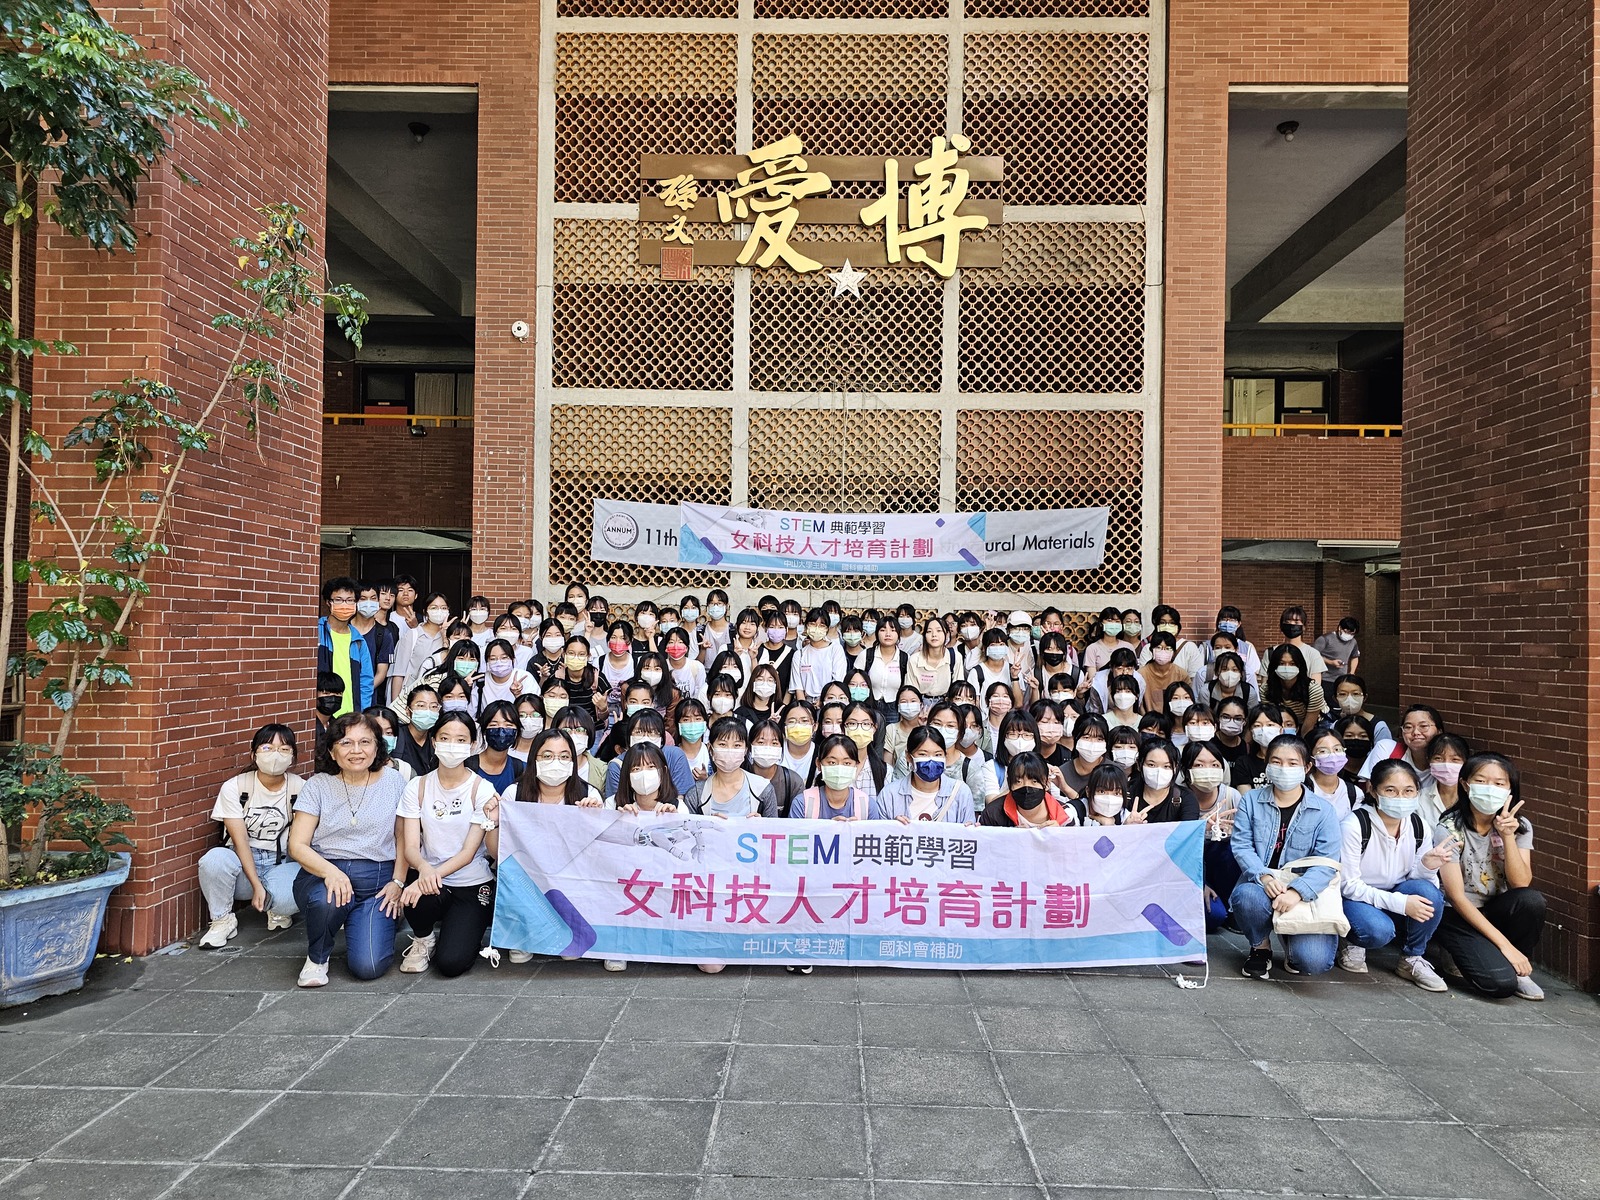 NSYSU held a Visit to NSYSU’s Laboratories for Female Scientists and Hands-on Experience Camp, allowing 150 female high school students from Tainan, Kaohsiung, and Pingtung to explore the mysteries of research laboratories.